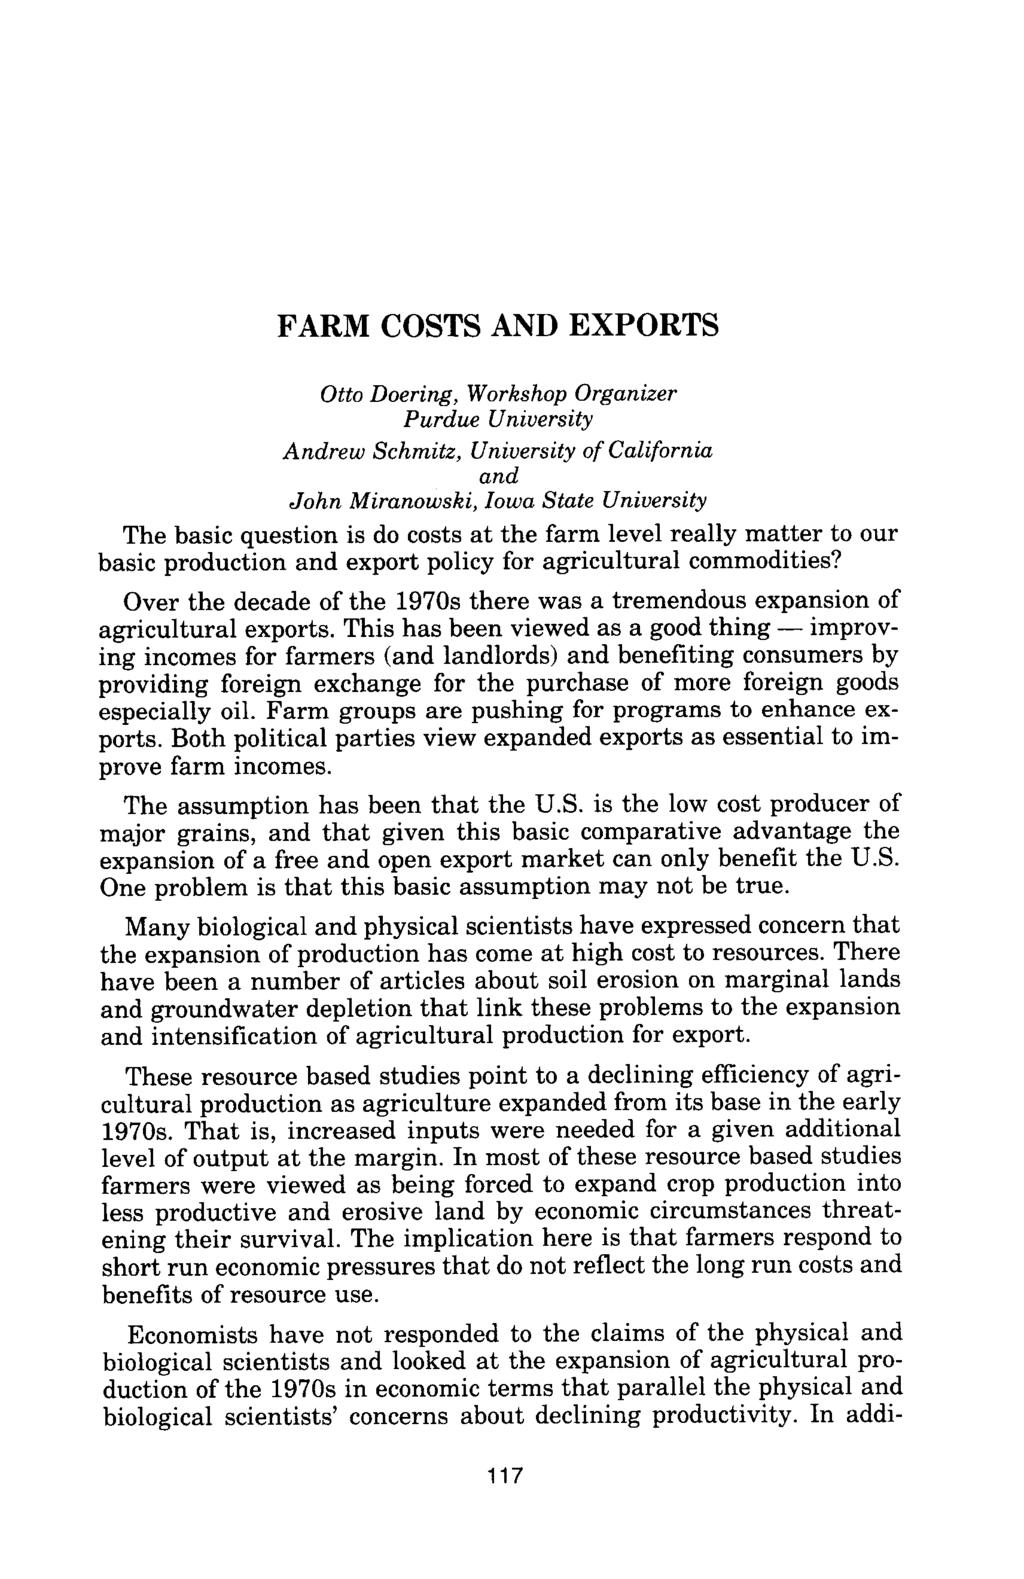 FARM COSTS AND EXPORTS Otto Doering, Workshop Organizer Purdue University Andrew Schmitz, University of California and John Miranowski, Iowa State University The basic question is do costs at the